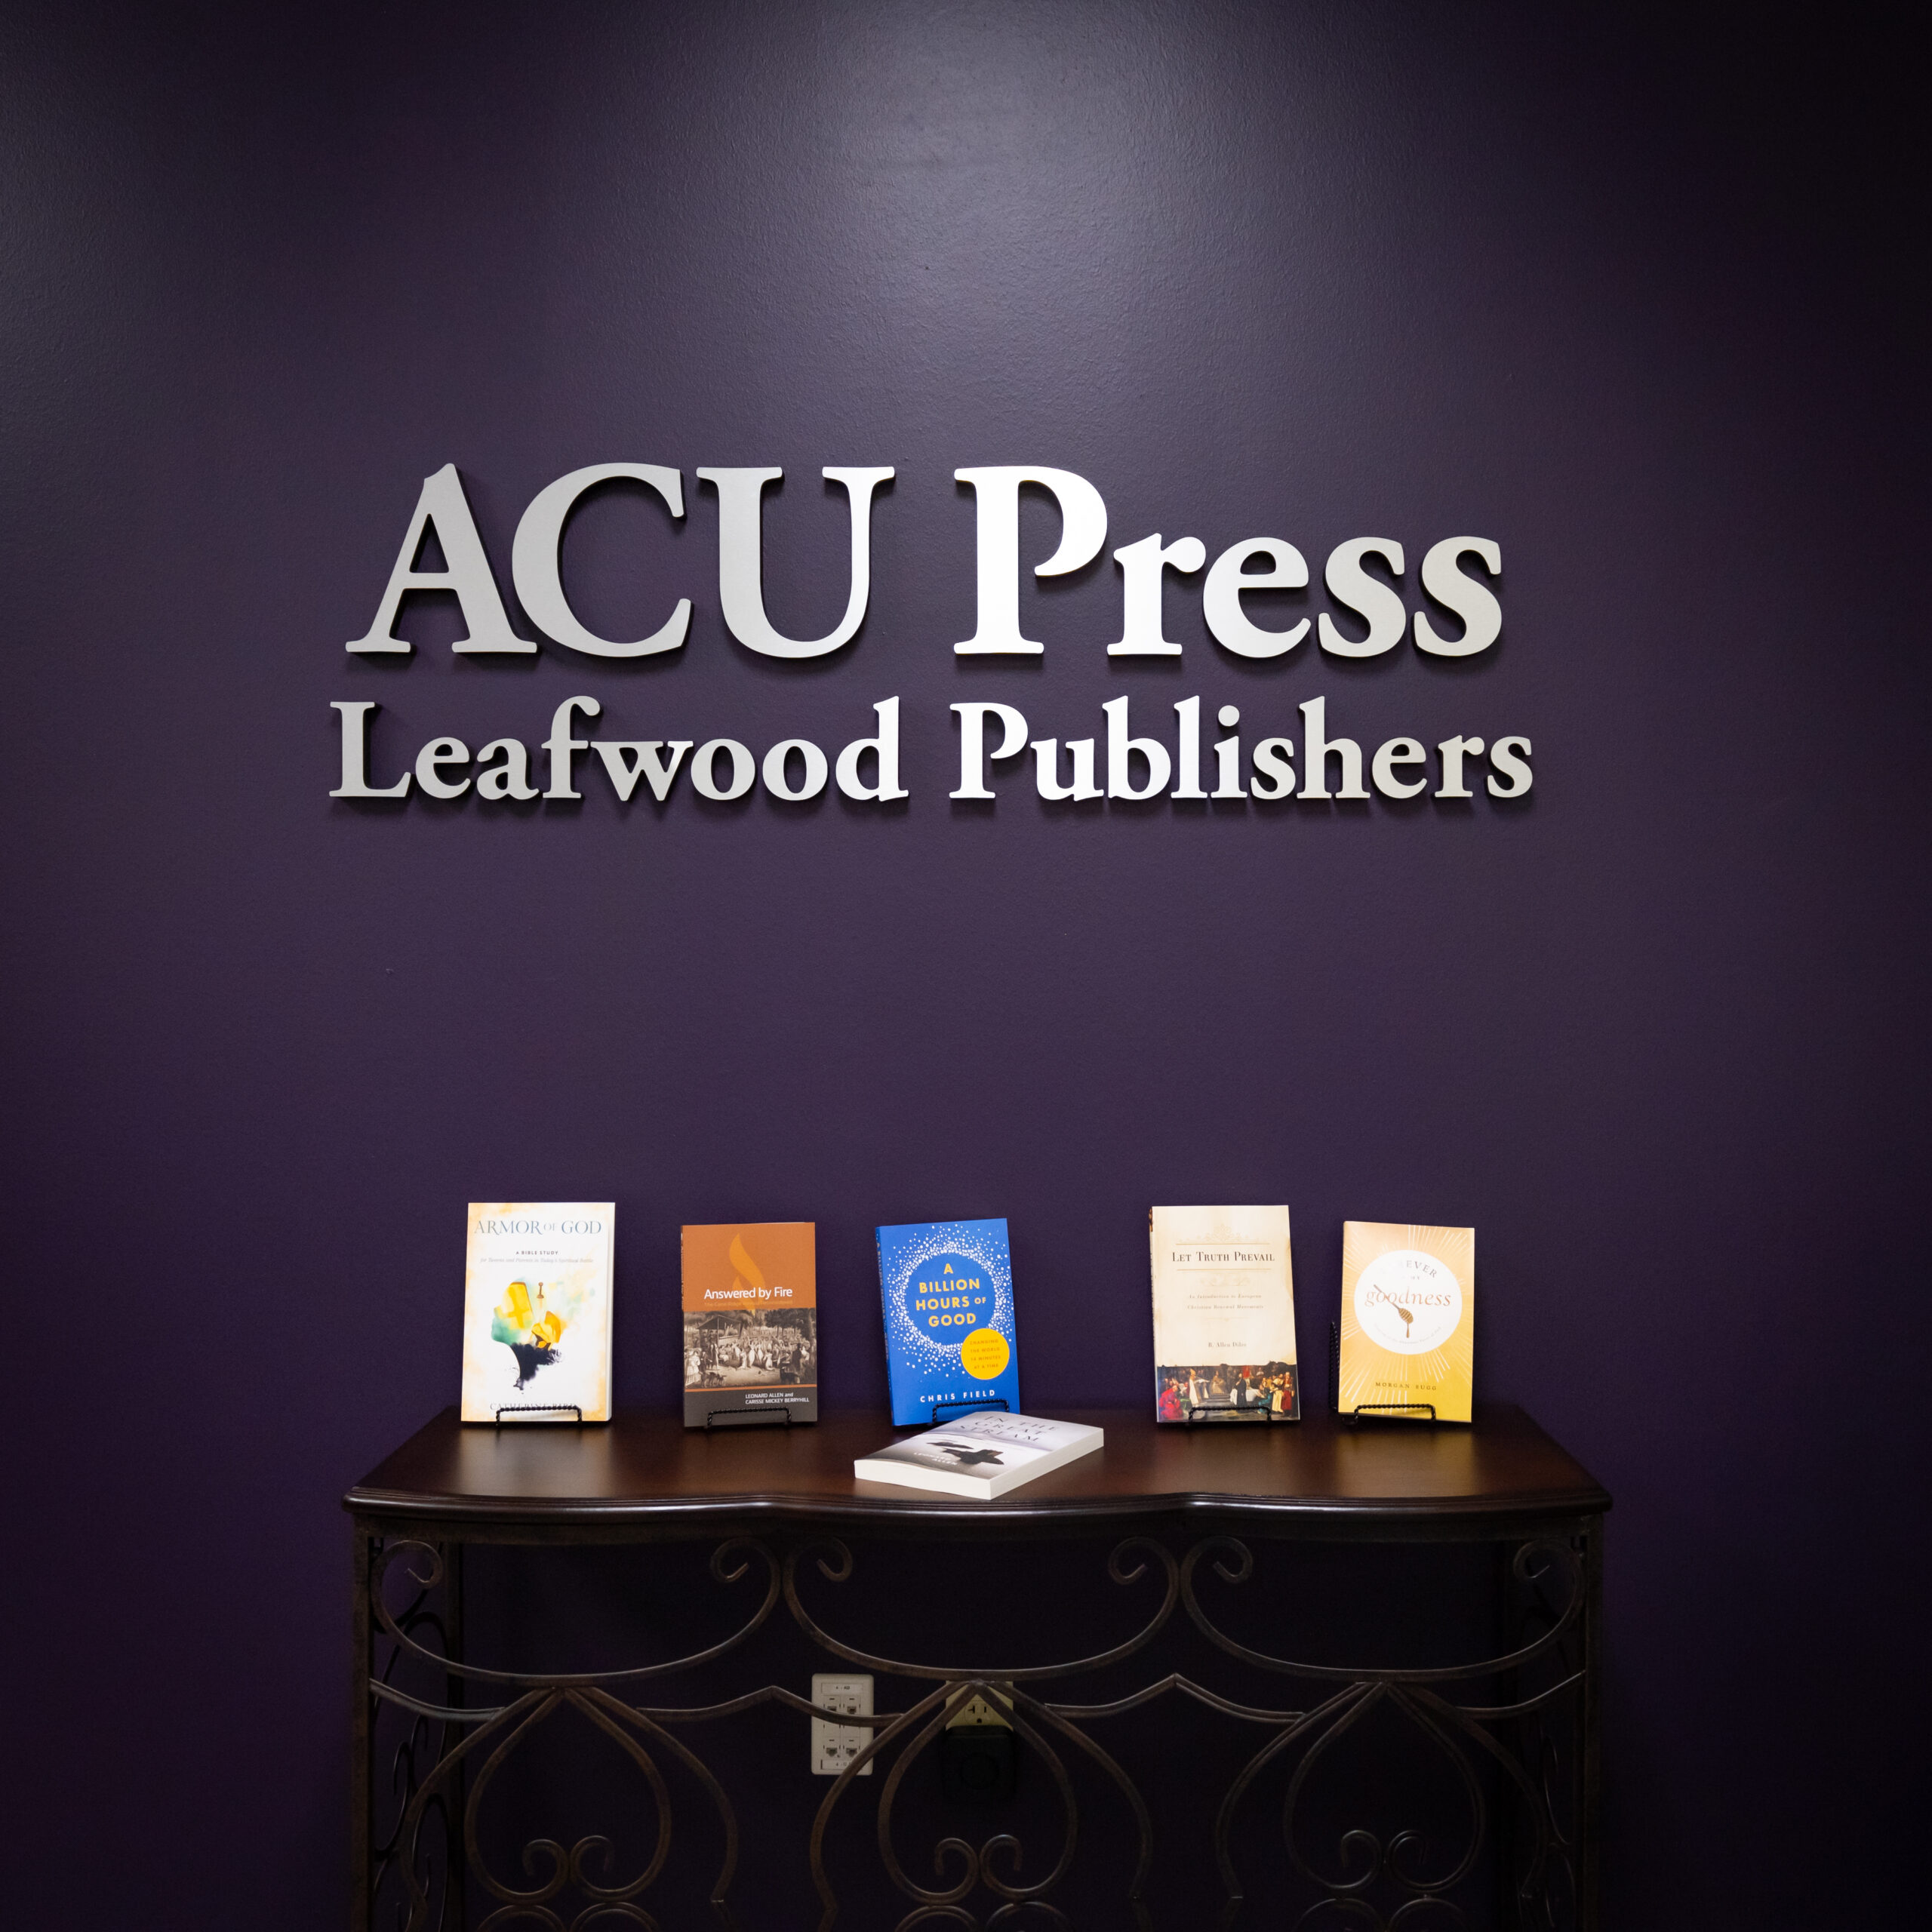 ACU Press sign in the library